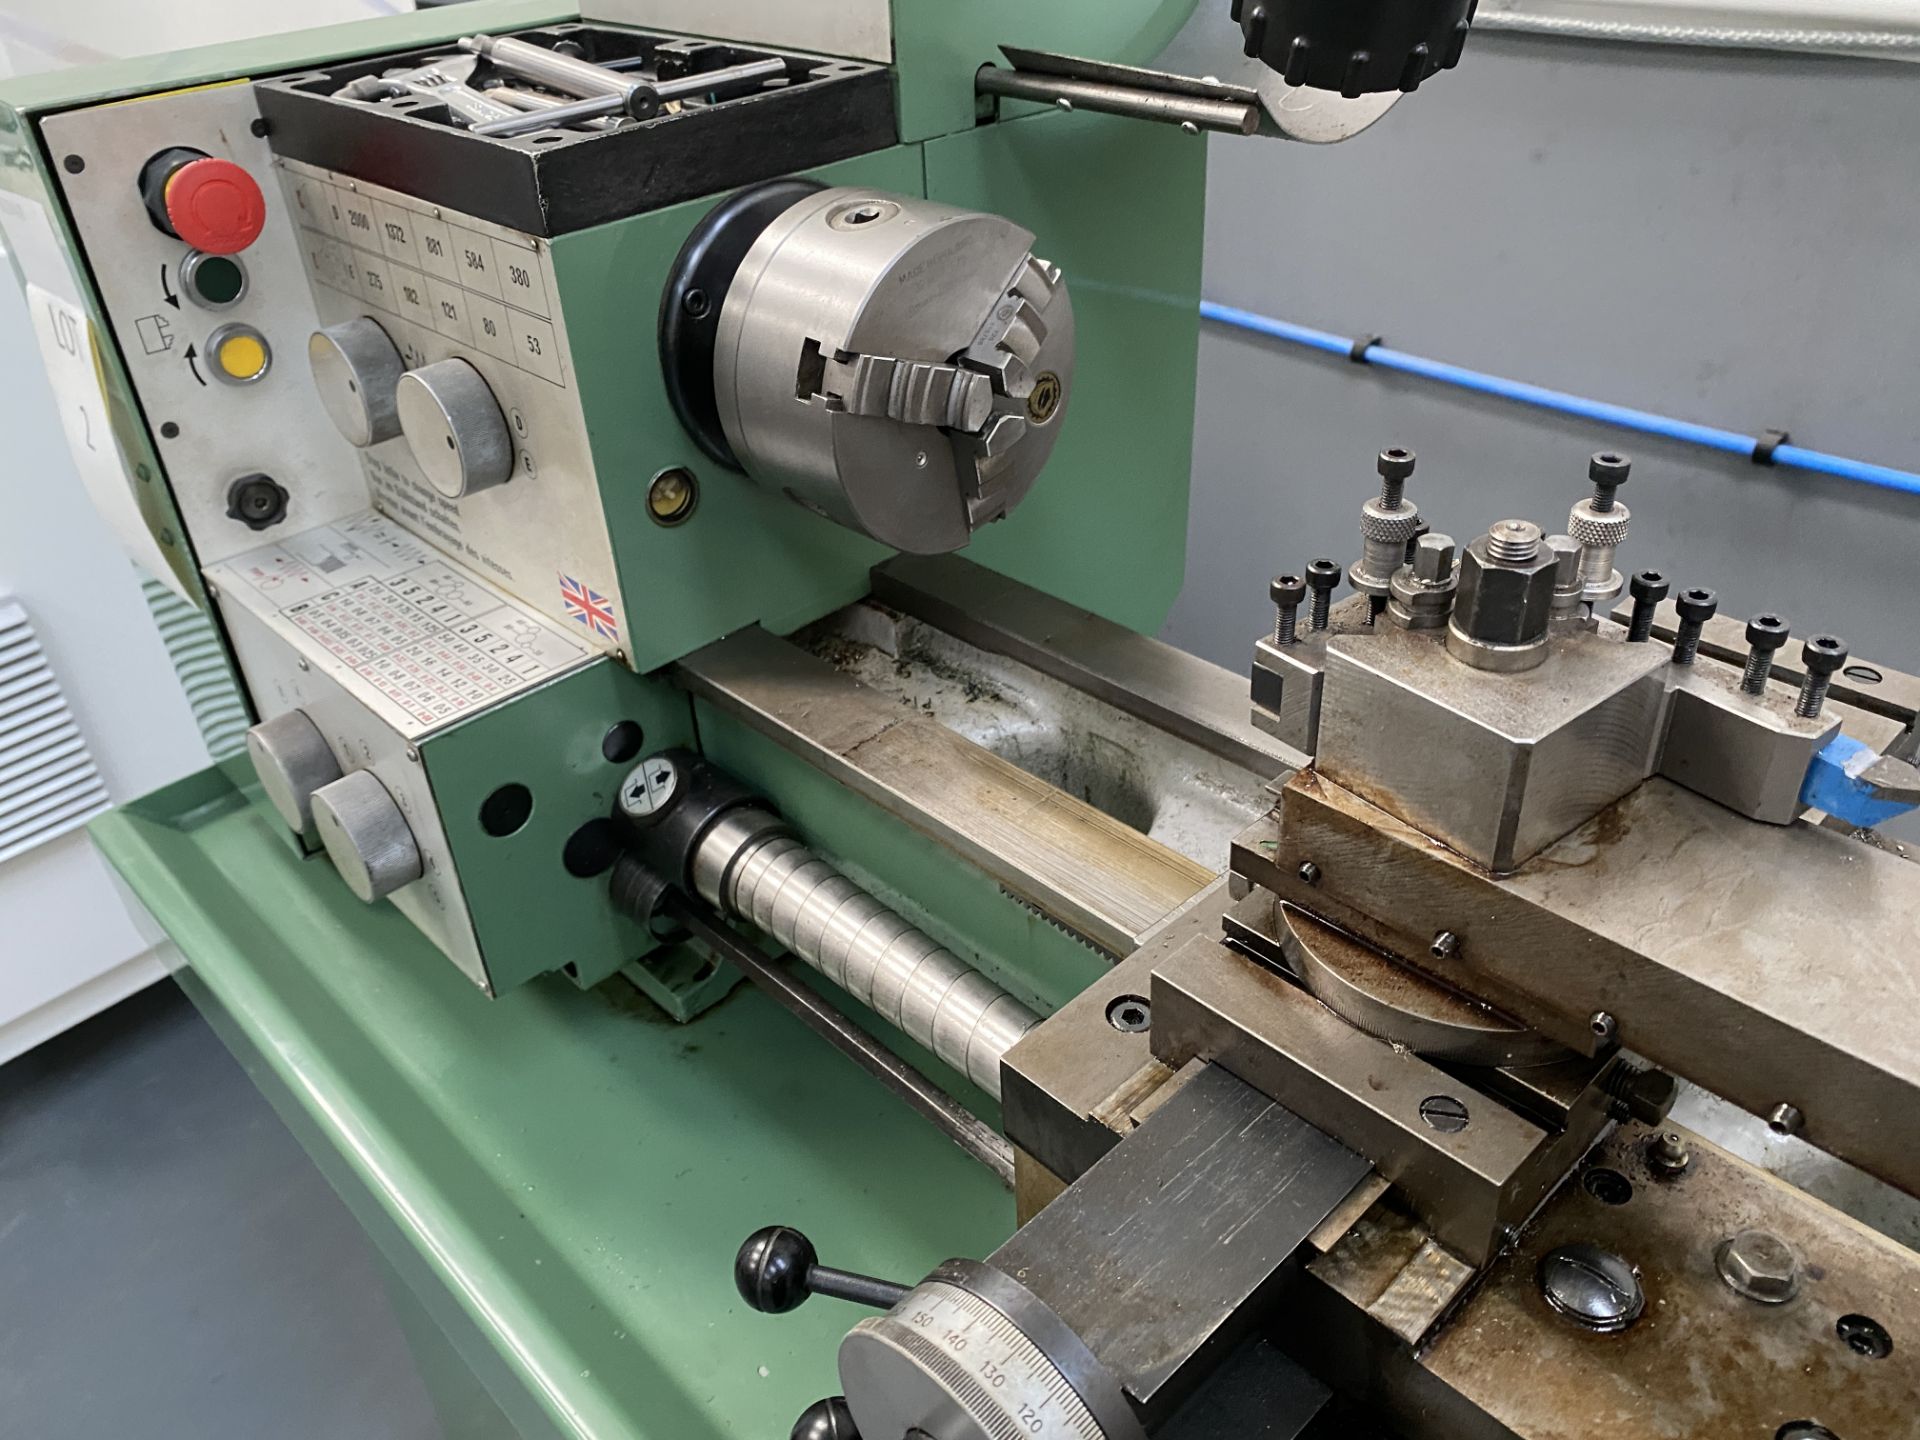 Myford 254s Hobby Lathe, Serial No. ZS164056 EIC with Powercross & Longitudinal Feeds with Tooling - Image 7 of 15